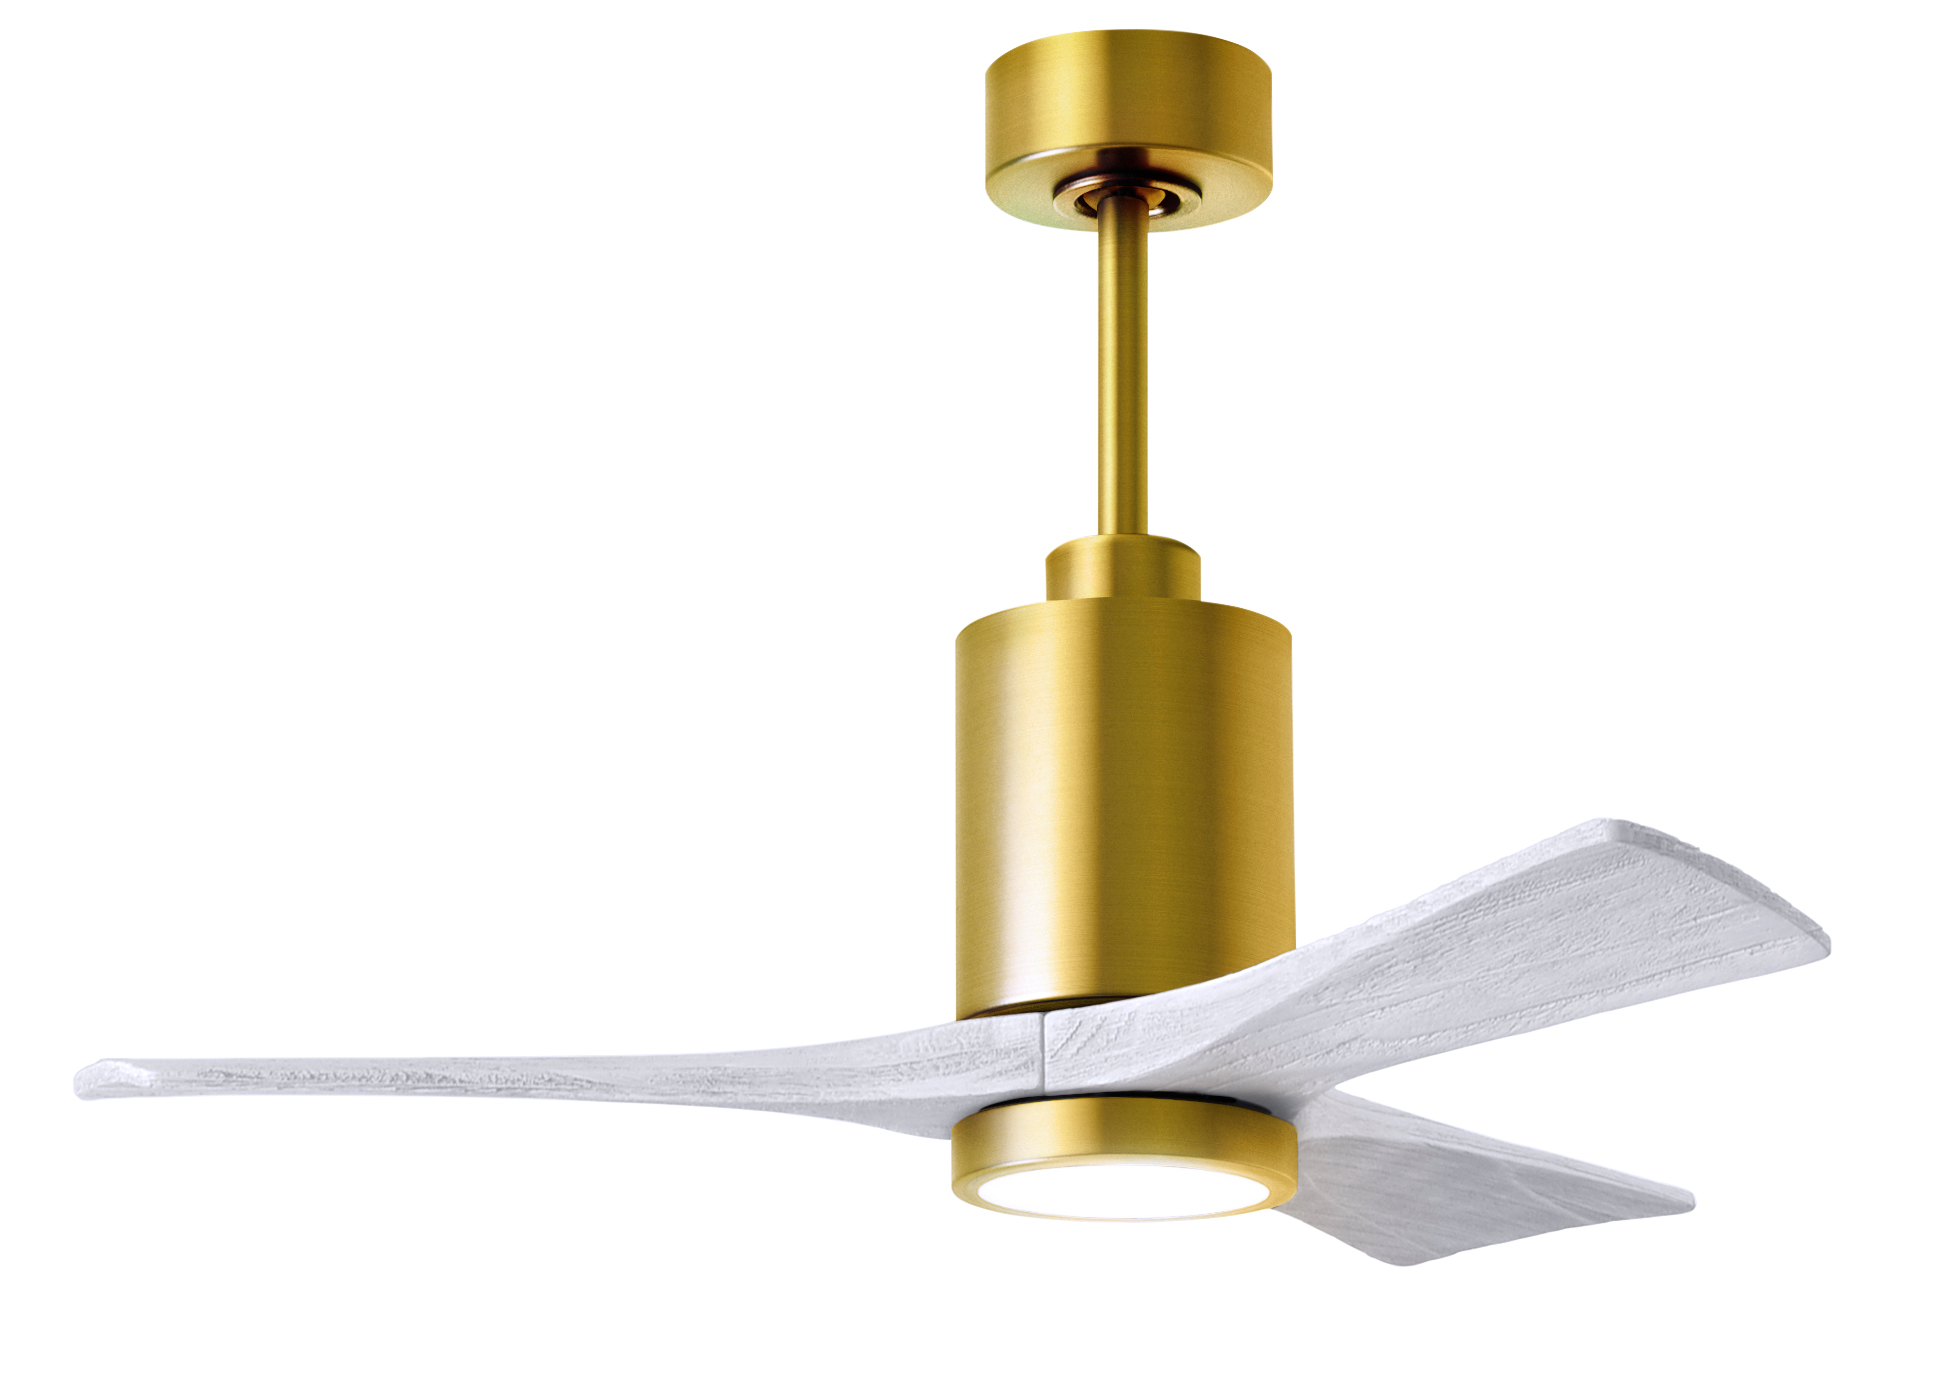 Patrícia–3 Ceiling Fan in Brushed Brass with 42